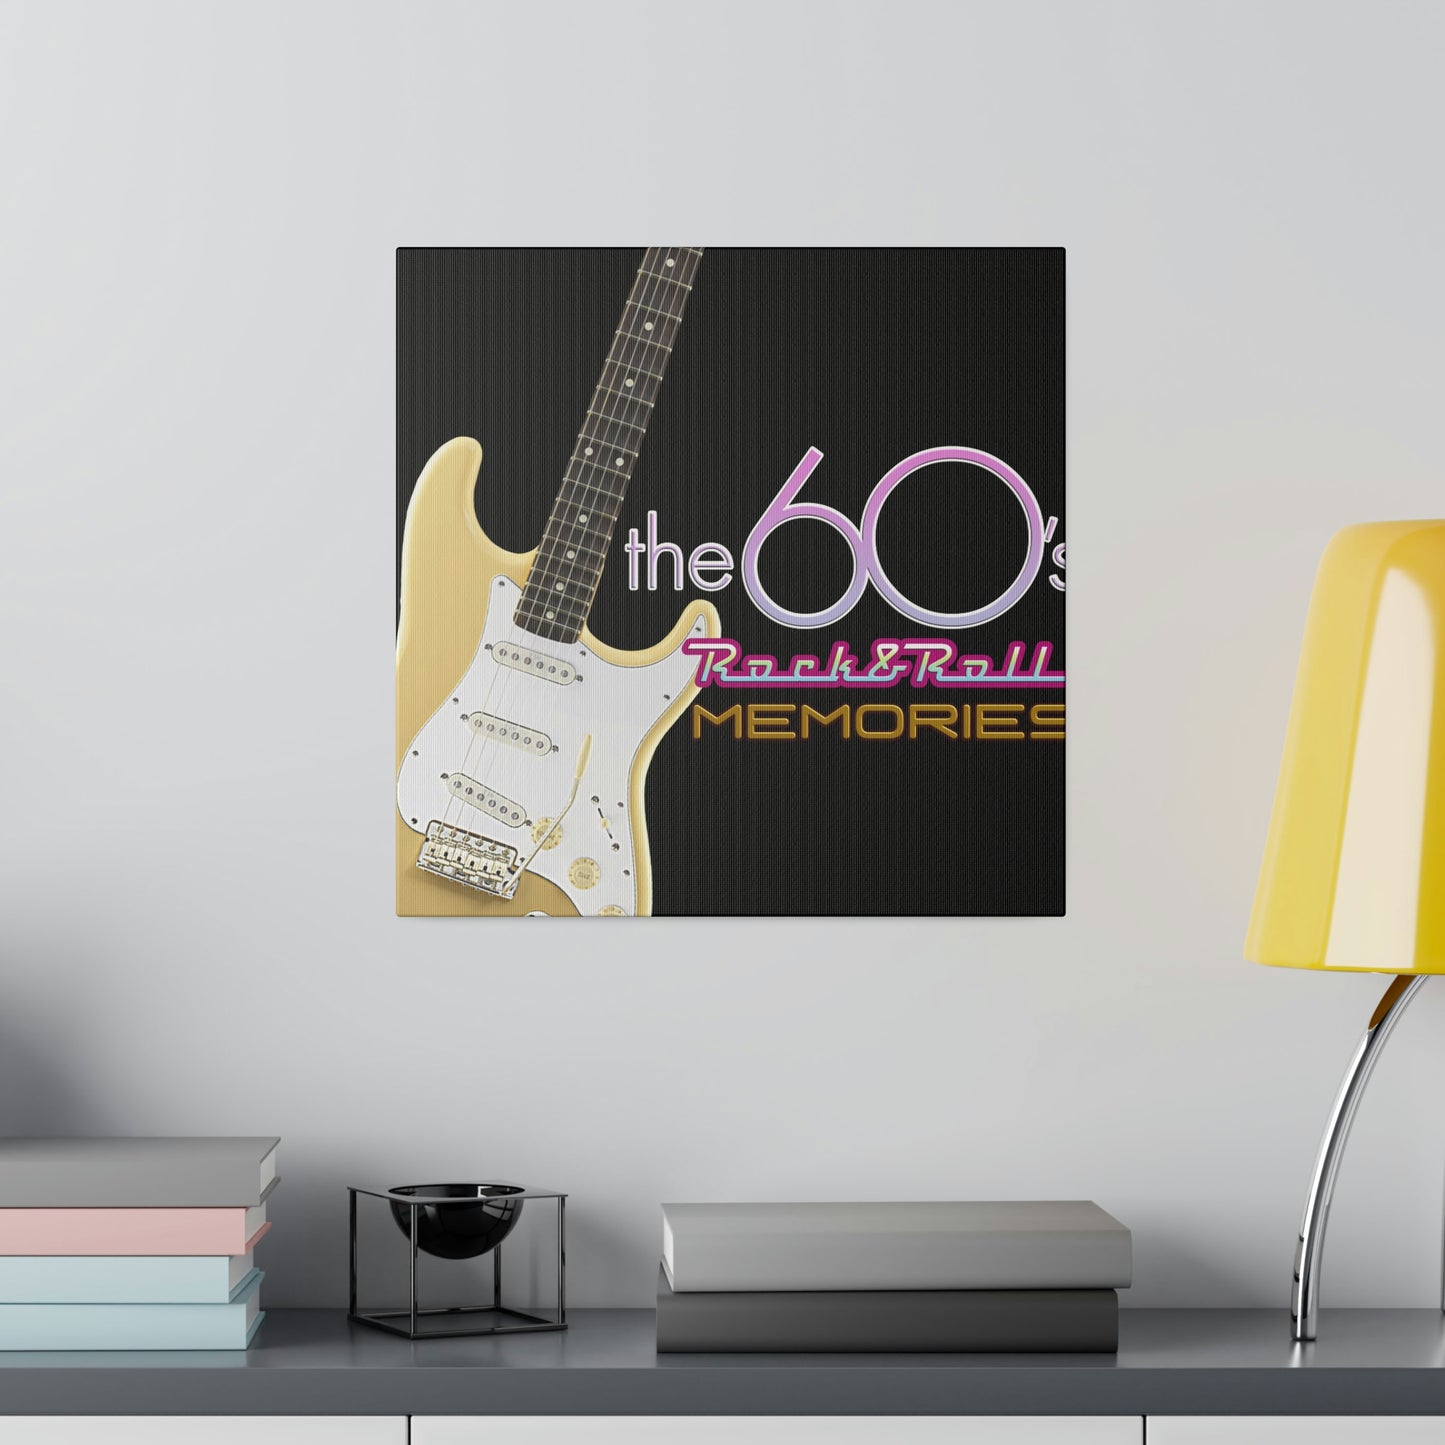 60's Rock and Roll Memories Graphic on Canvas